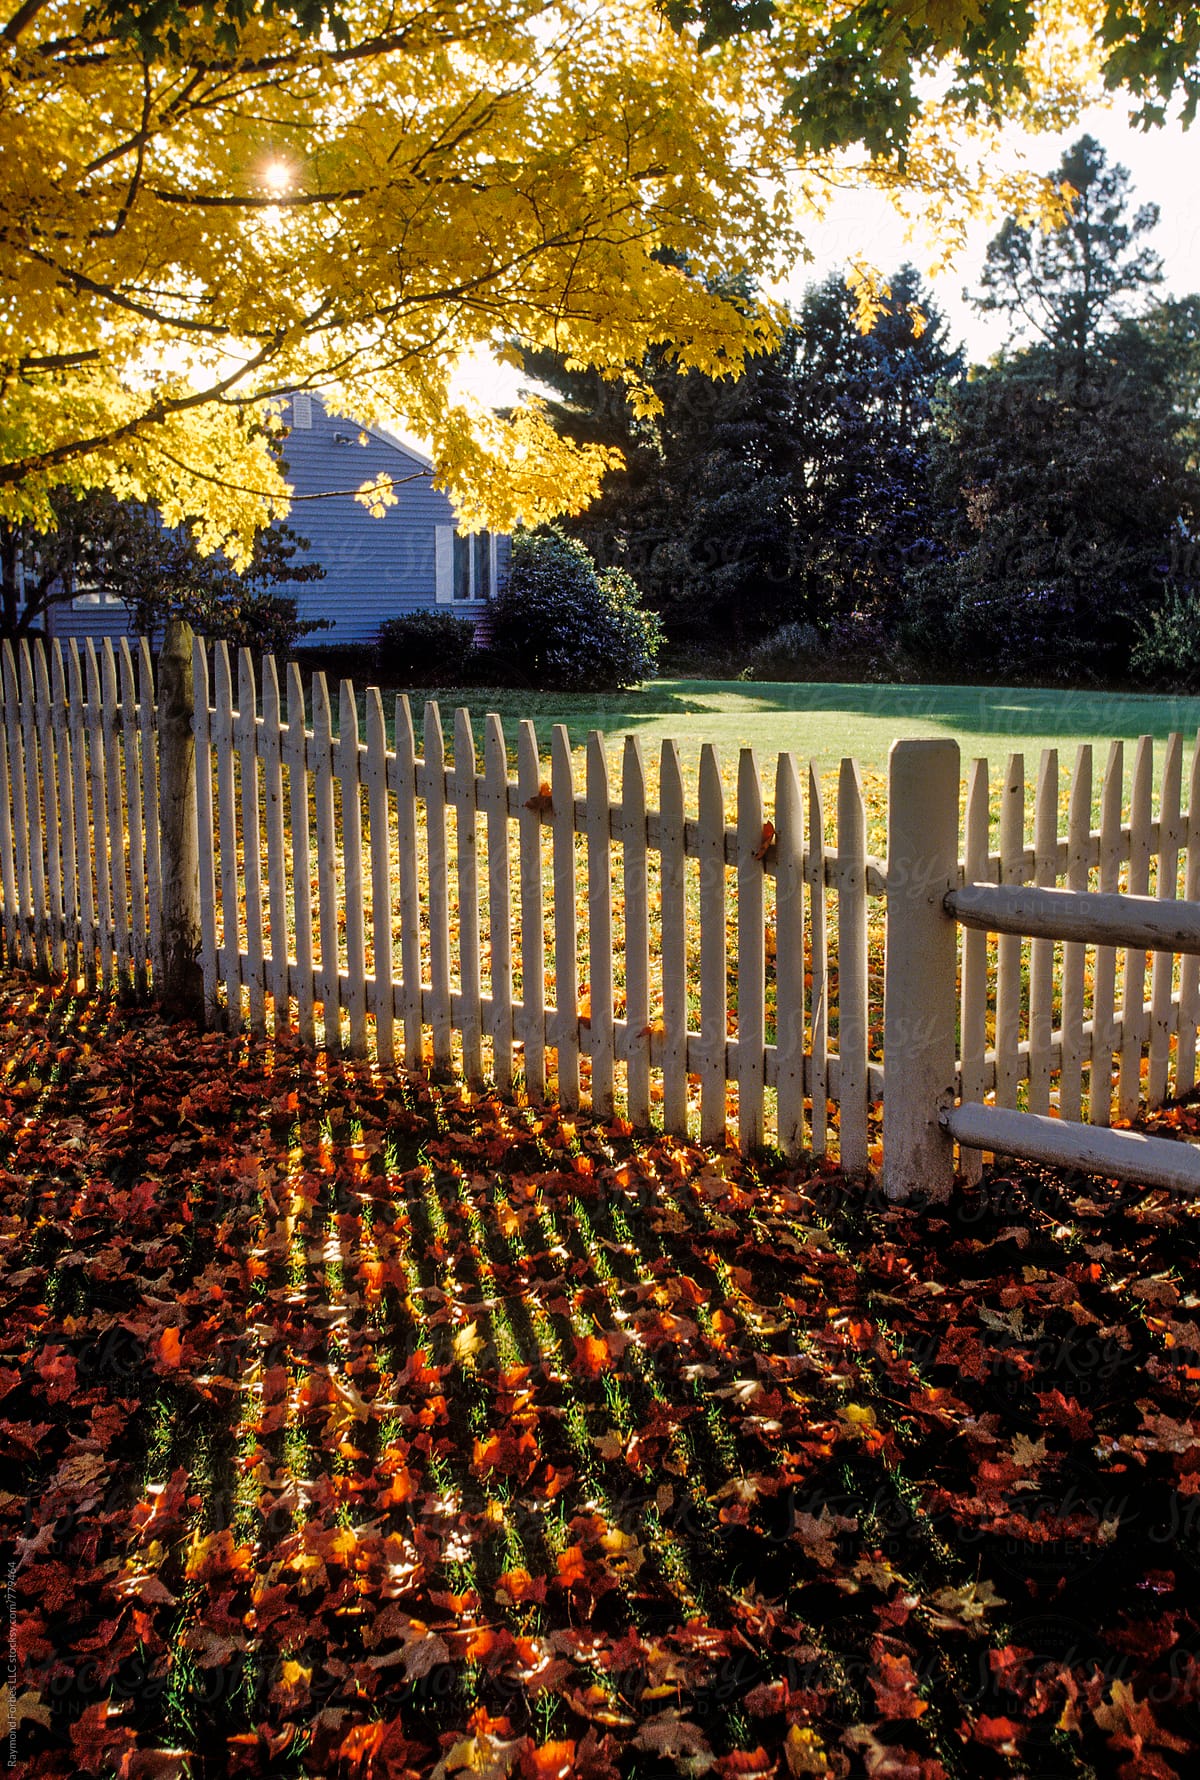 White picket Fence in Fall season with foliage